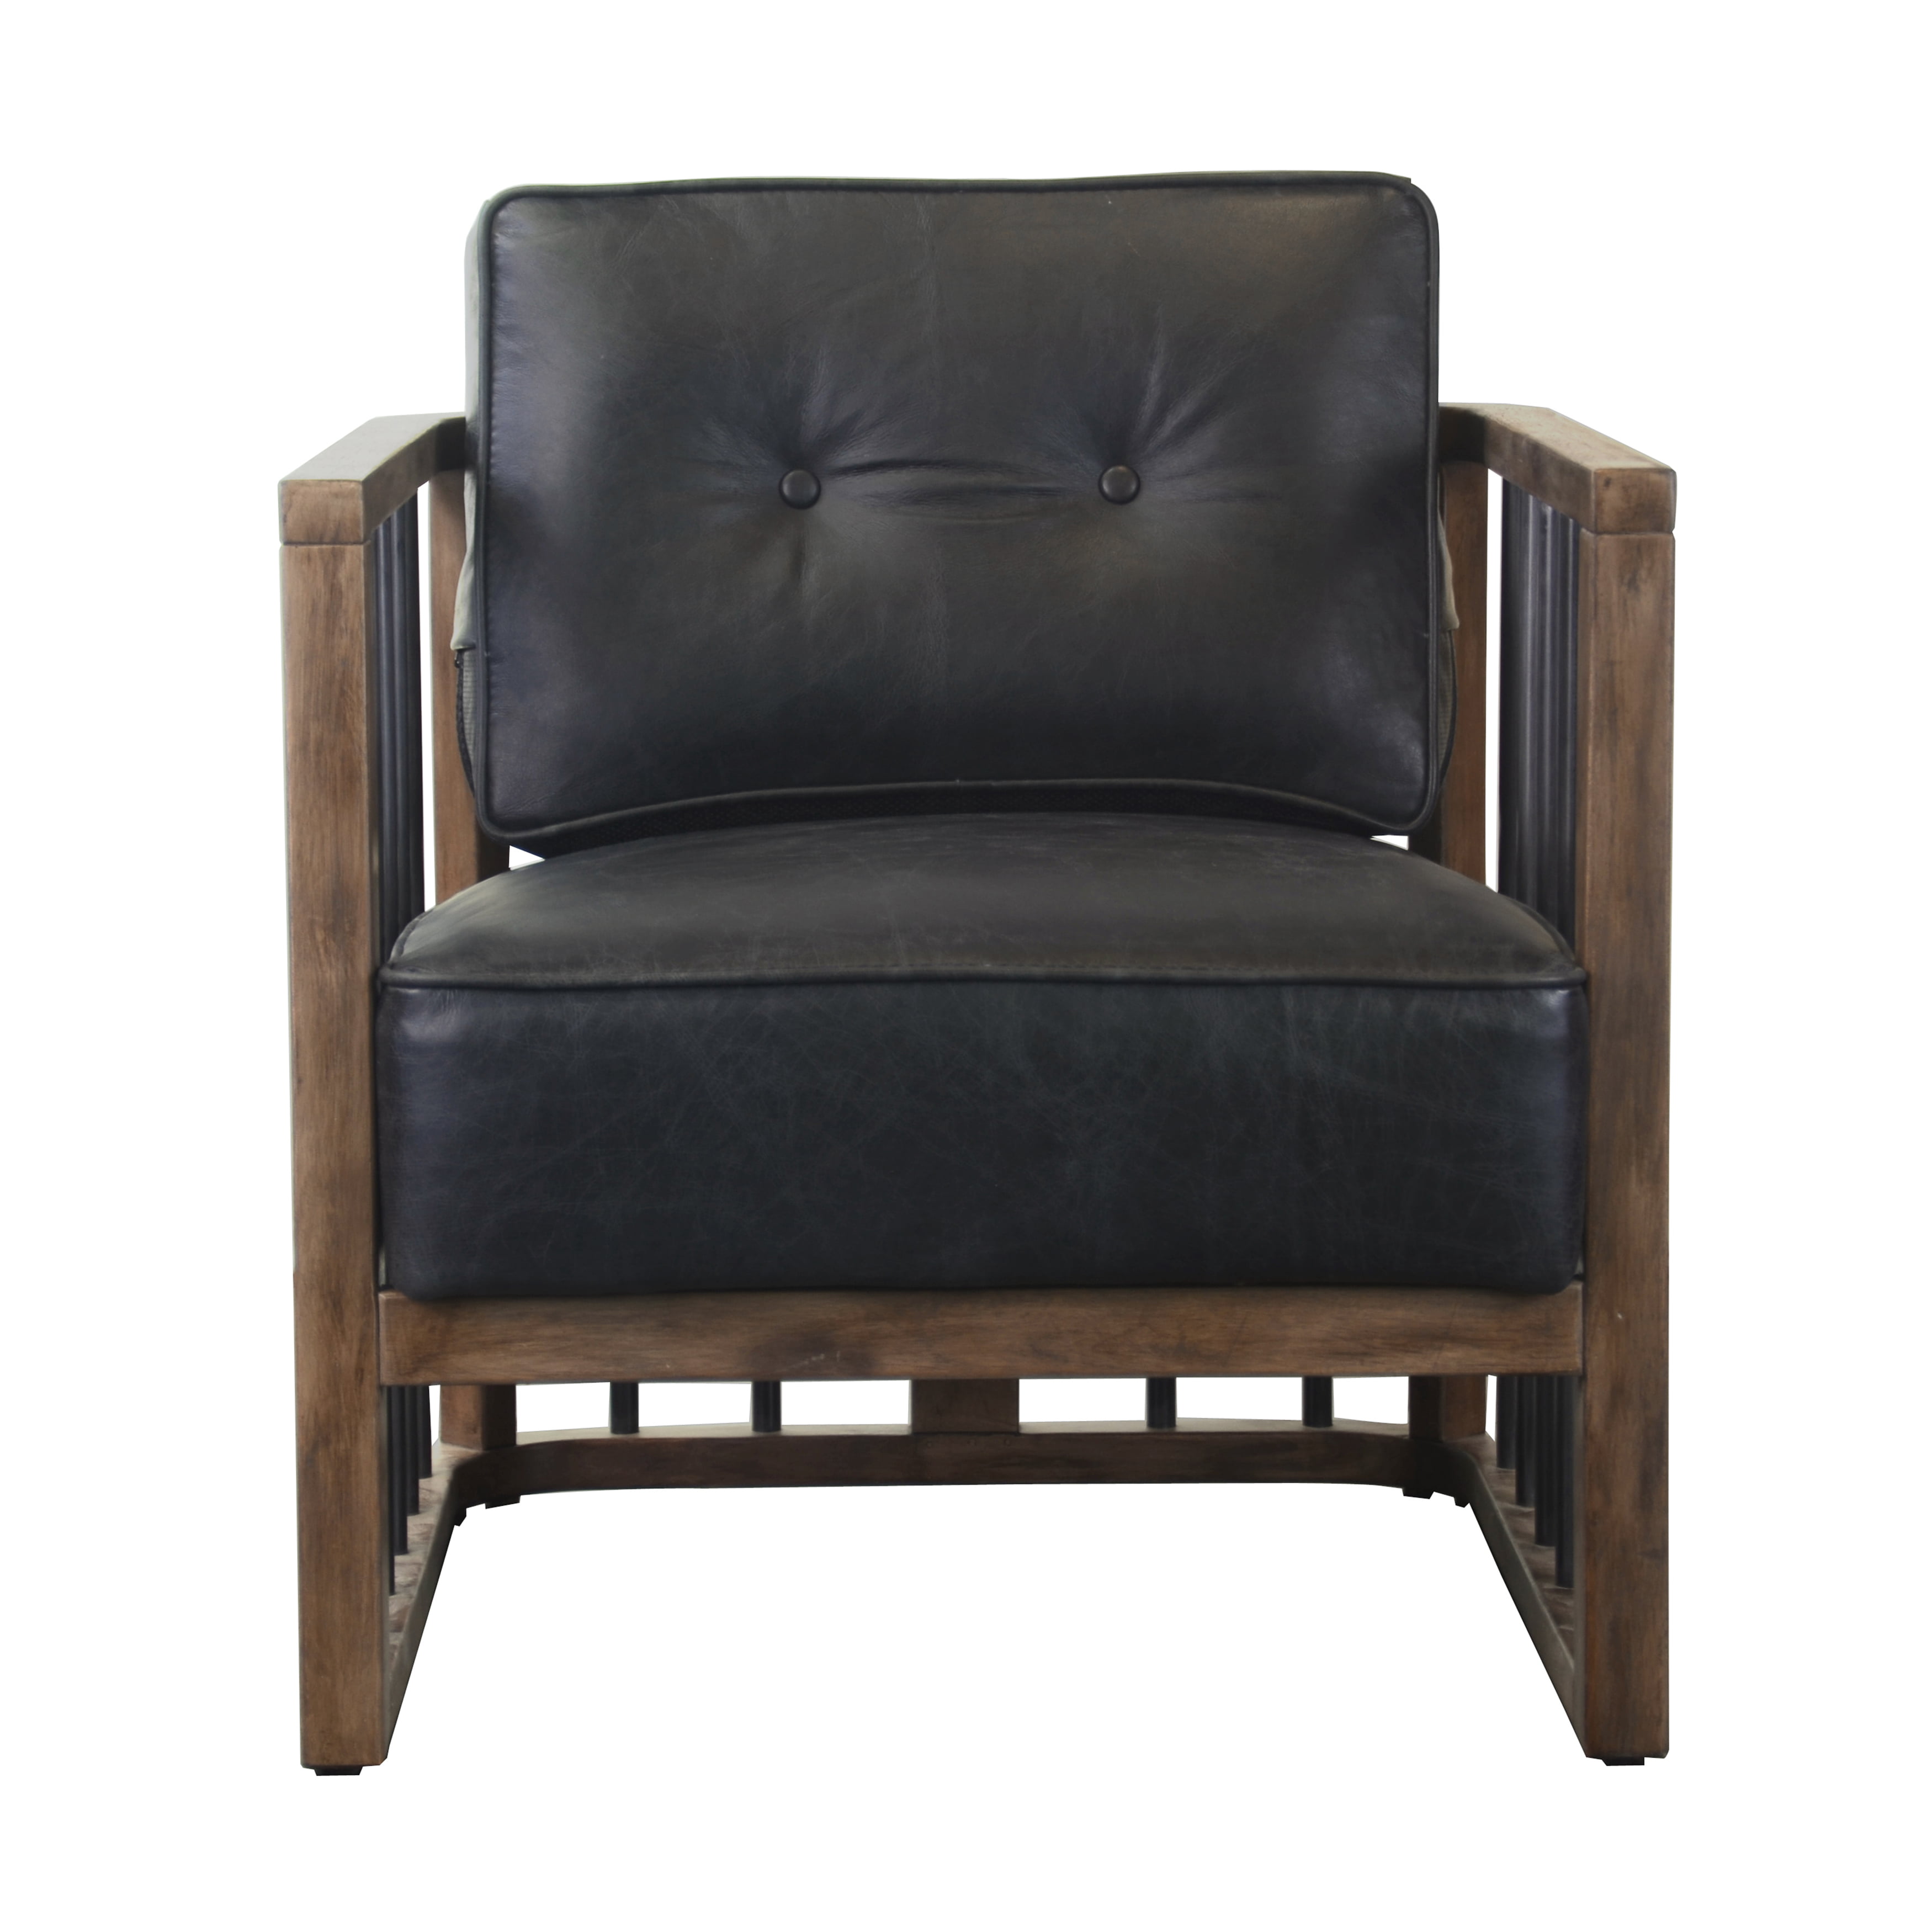 WoodFramed Leather and Metal Accent Chair in Black